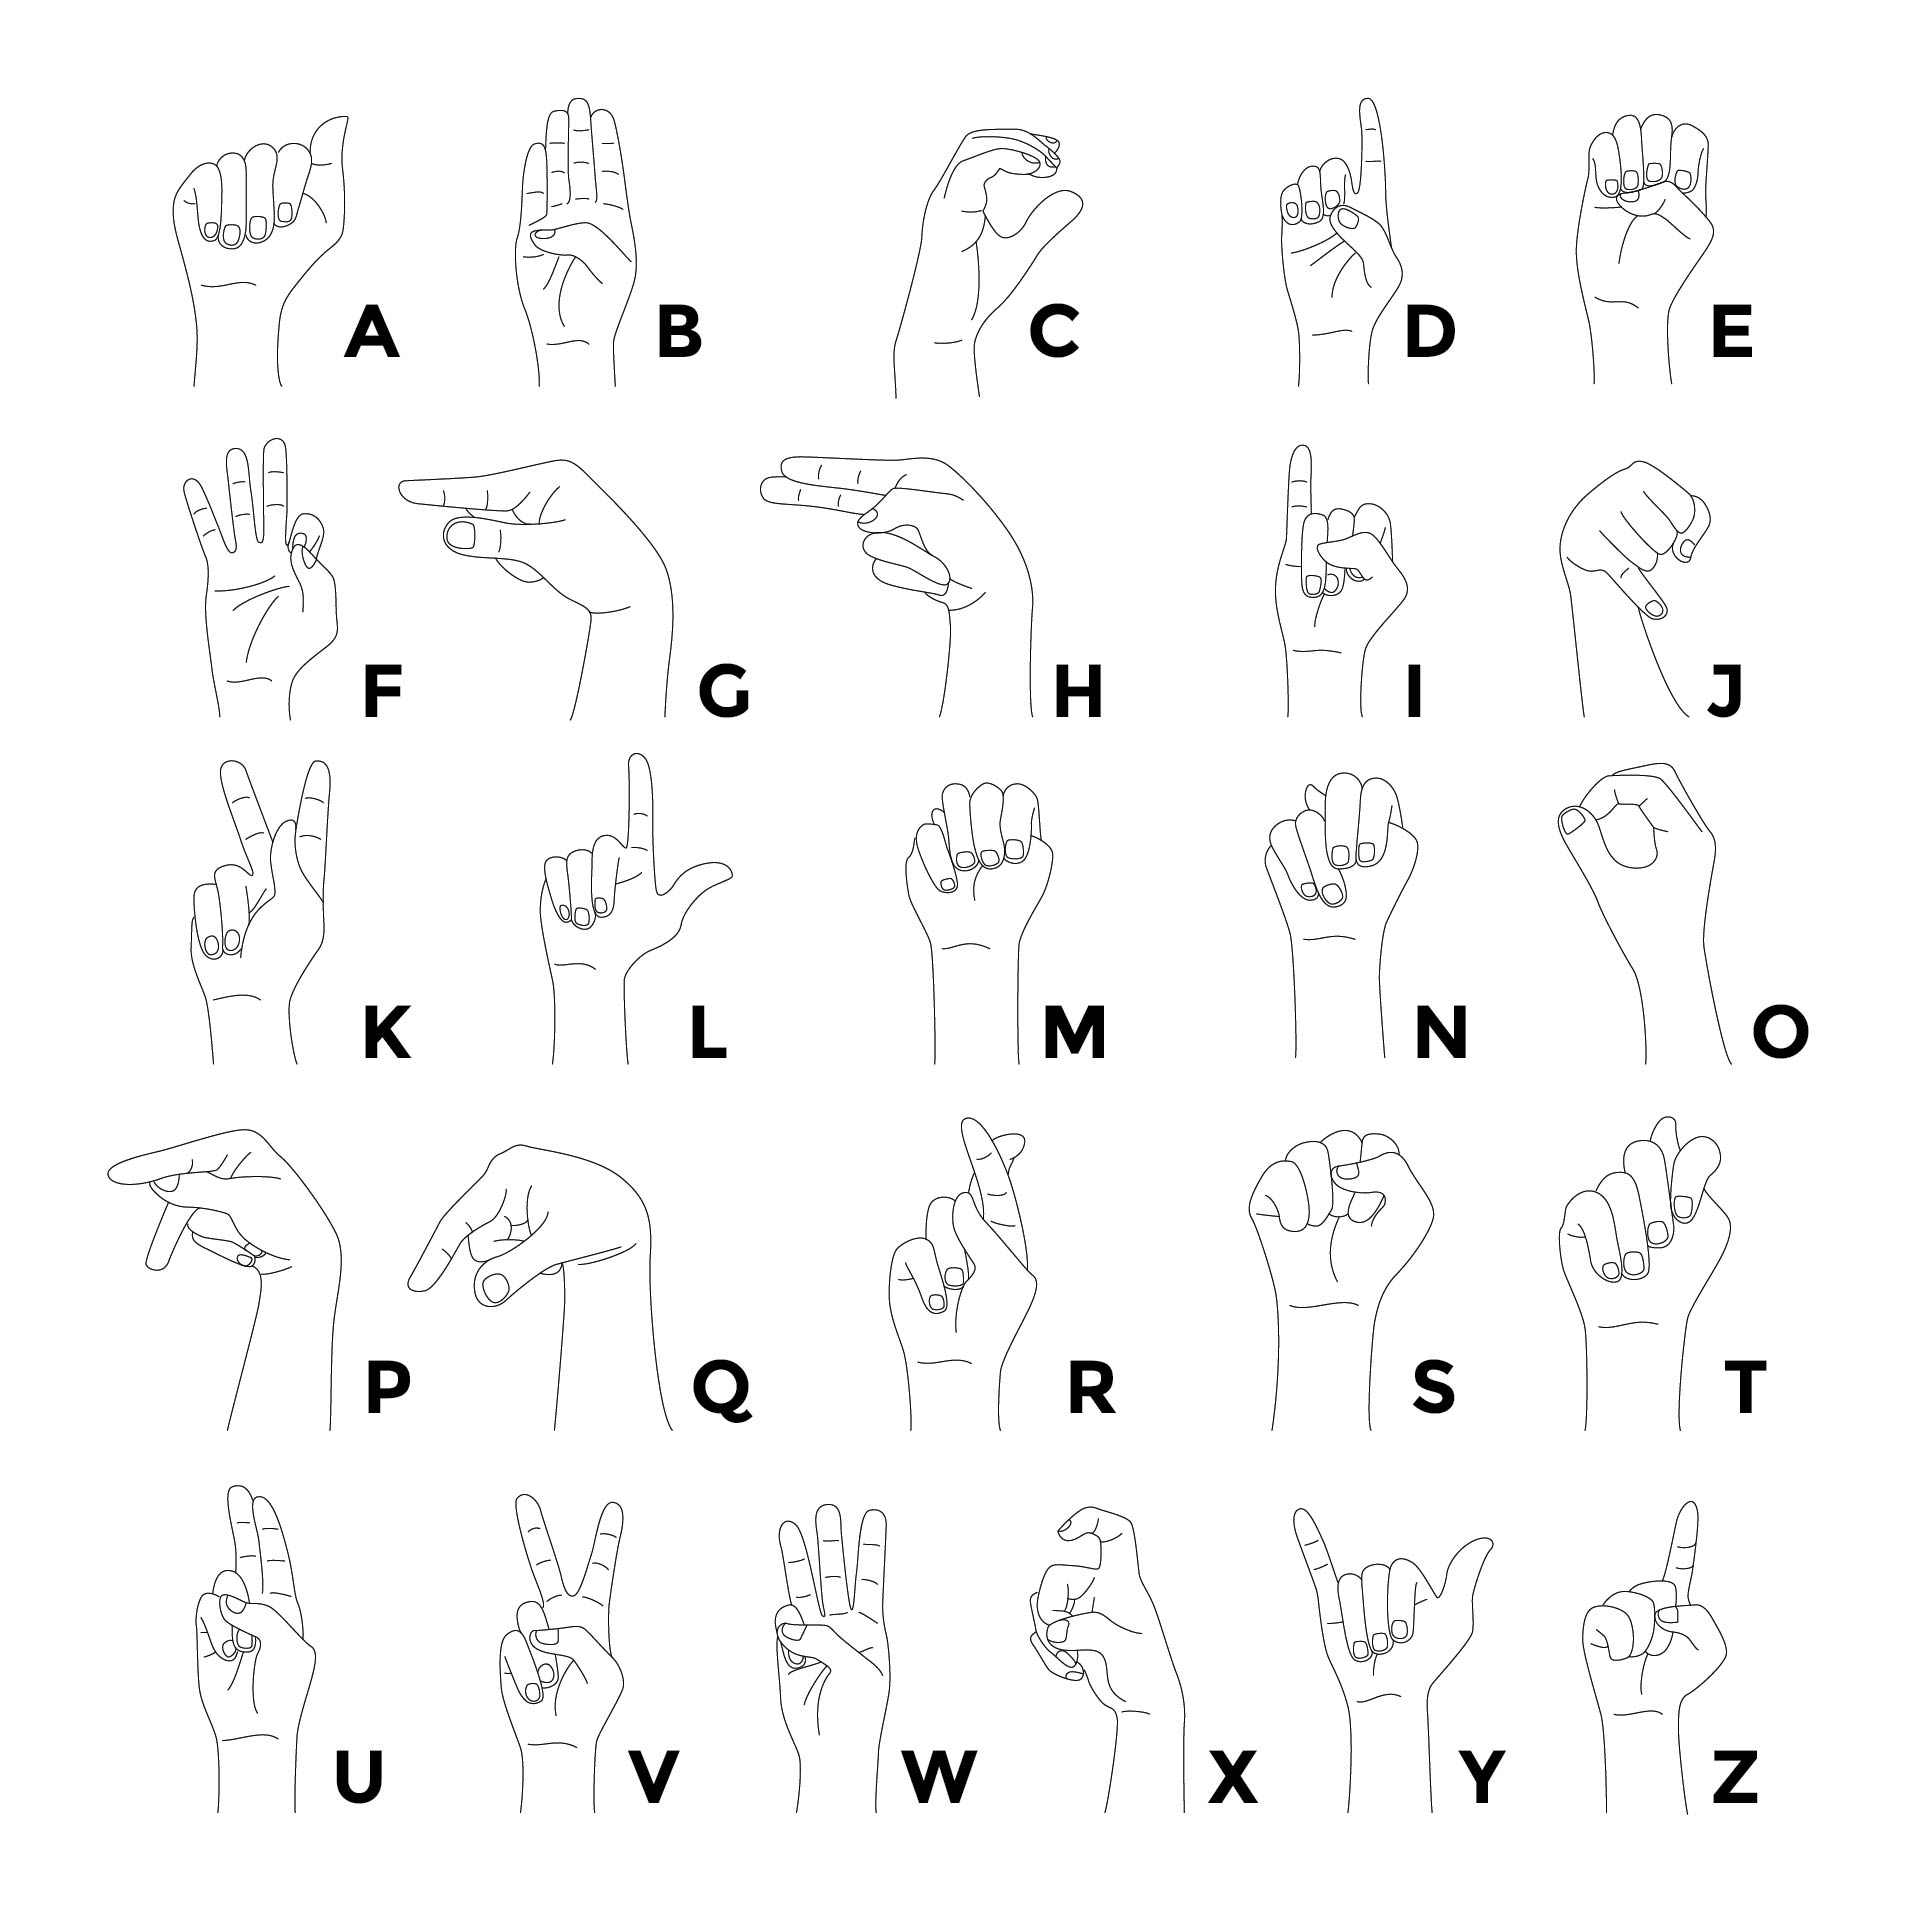 5-best-images-of-sign-language-numbers-1-100-chart-printables-printable-sign-language-numbers